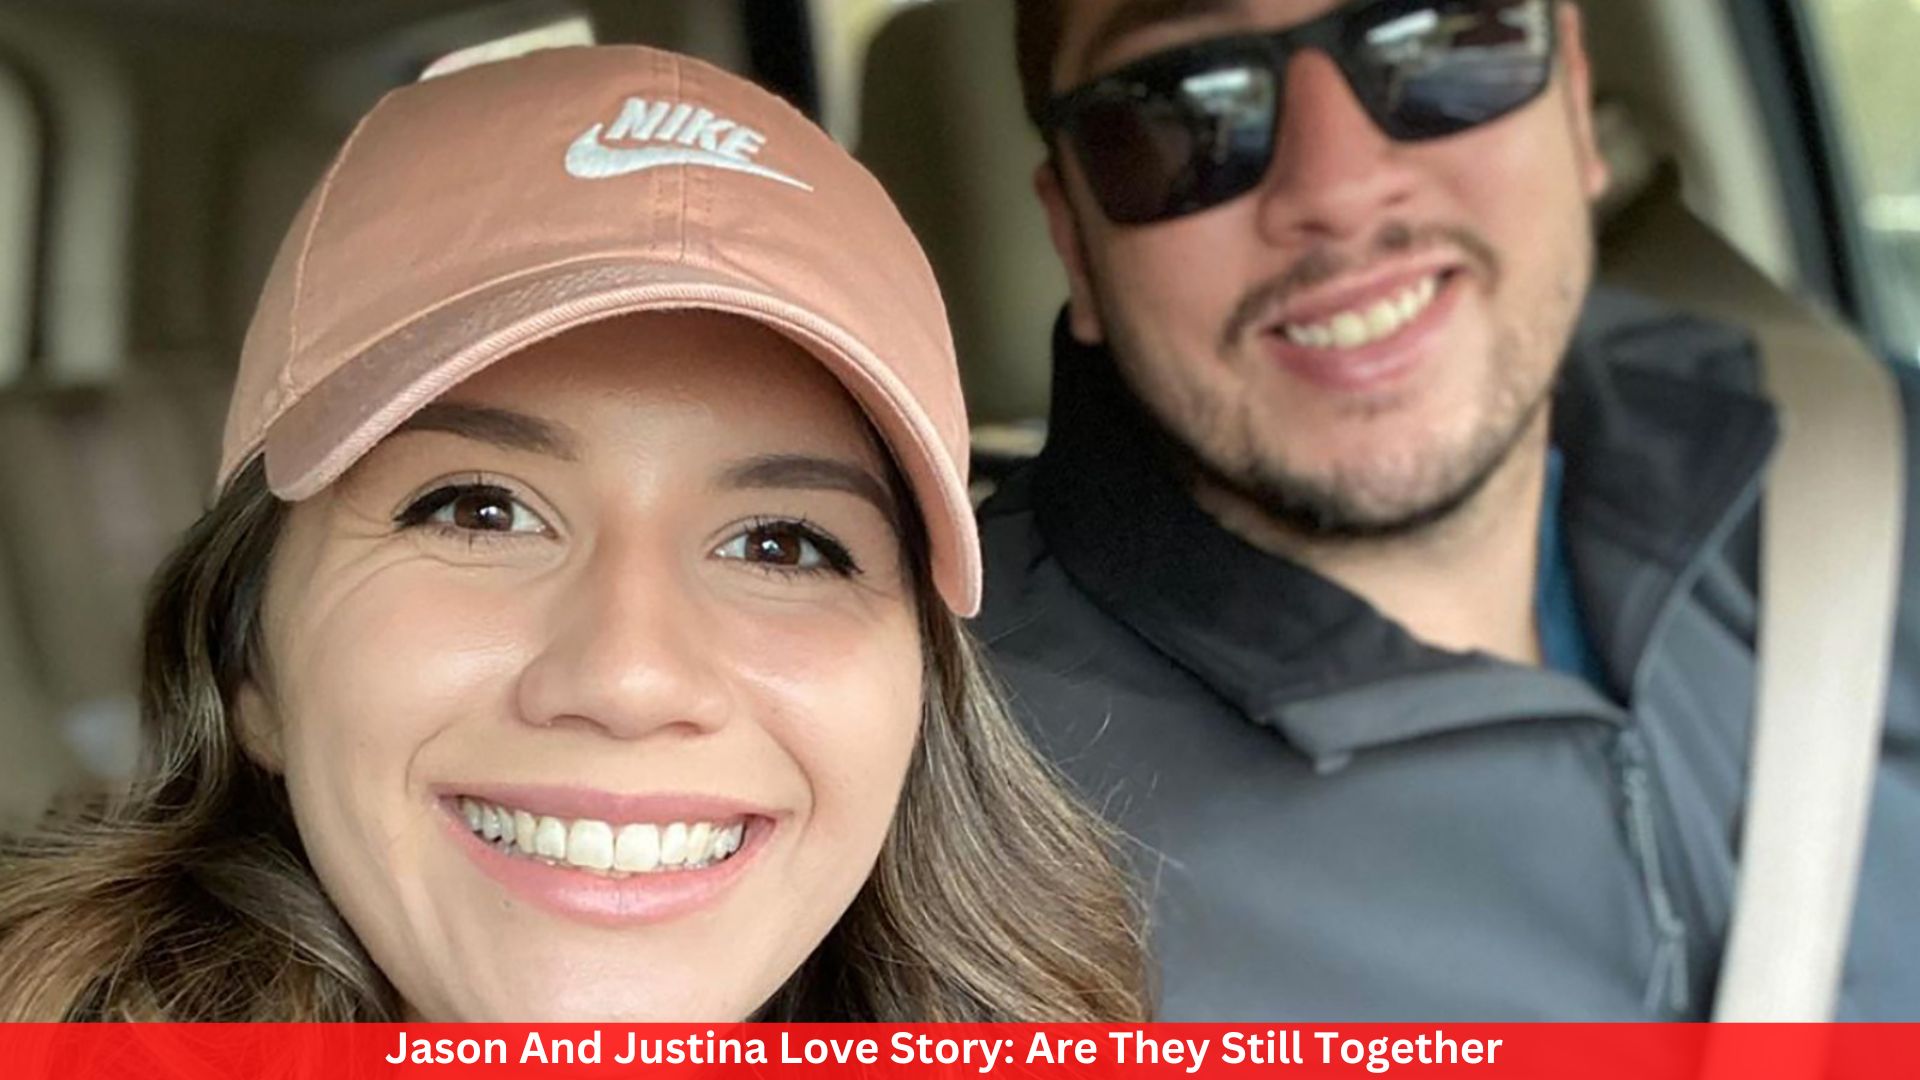 Jason And Justina Love Story: Are They Still Together